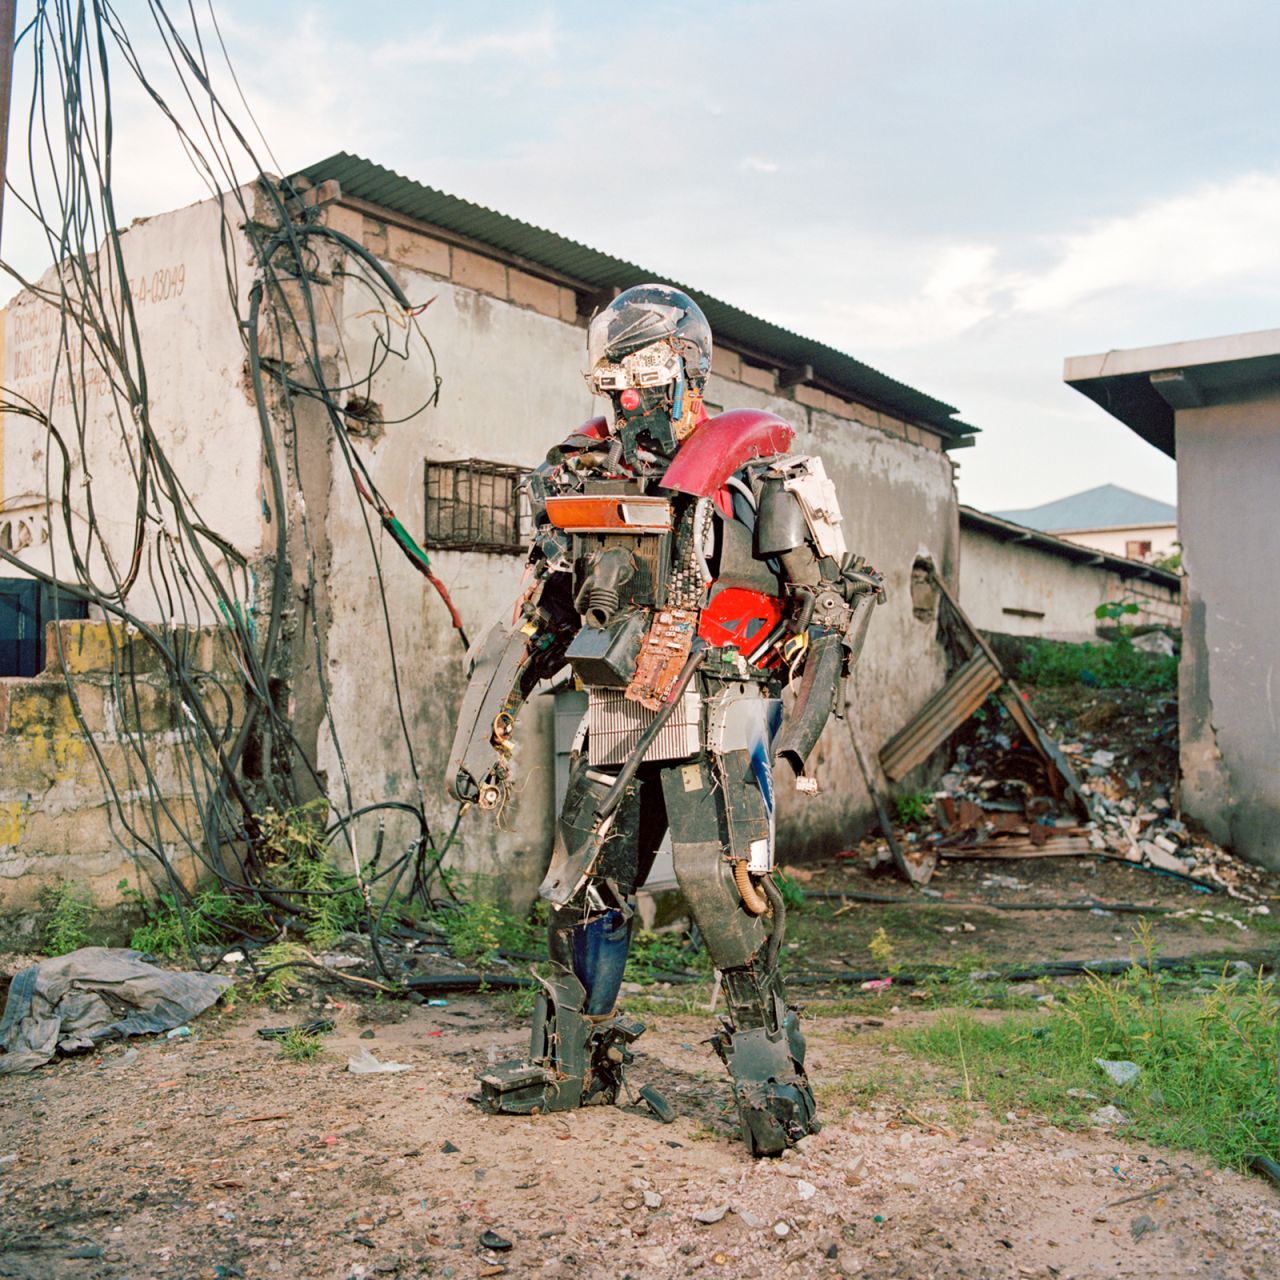 Congolese artist Jean Precy Numbi Samba, also known by his artist name Robot Kimbalambala posing in his robot sapiens costume made from car's spare parts,  in Ngiri Ngiri district, Kinshasa ( Democratic Republic of Congo), December 2019. The artist thus denounces the environmental, technological and political issues common to African countries.